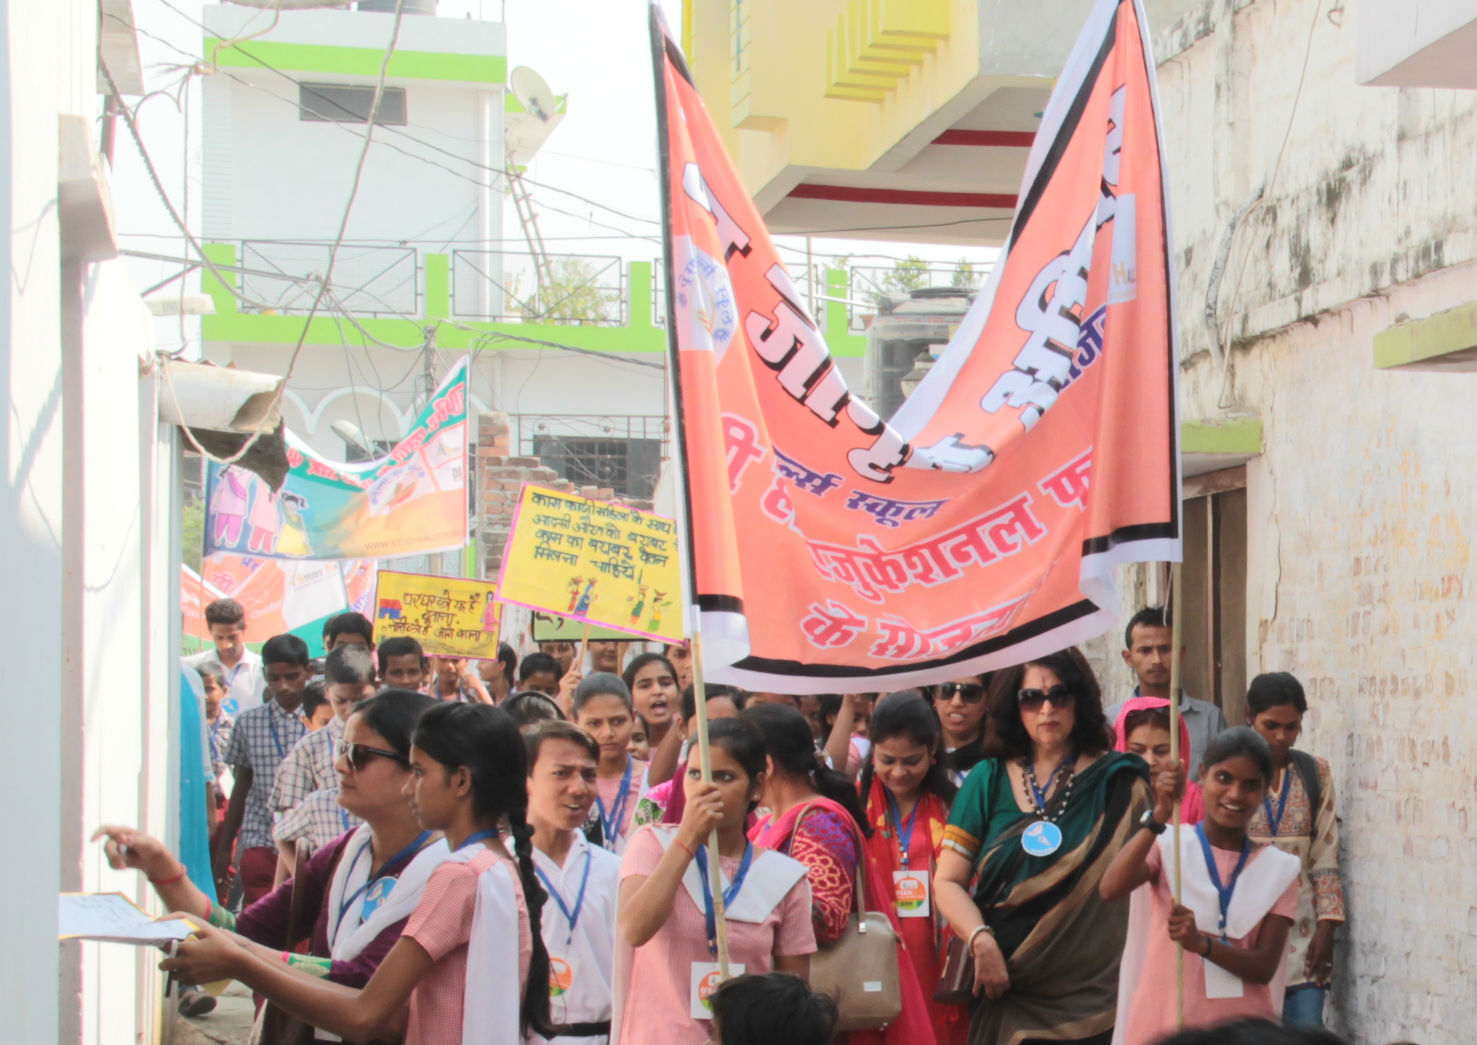 Prena students, led by the school's founder Urvashi Sahni, marching for girls' rights in India (Prena Girls School)